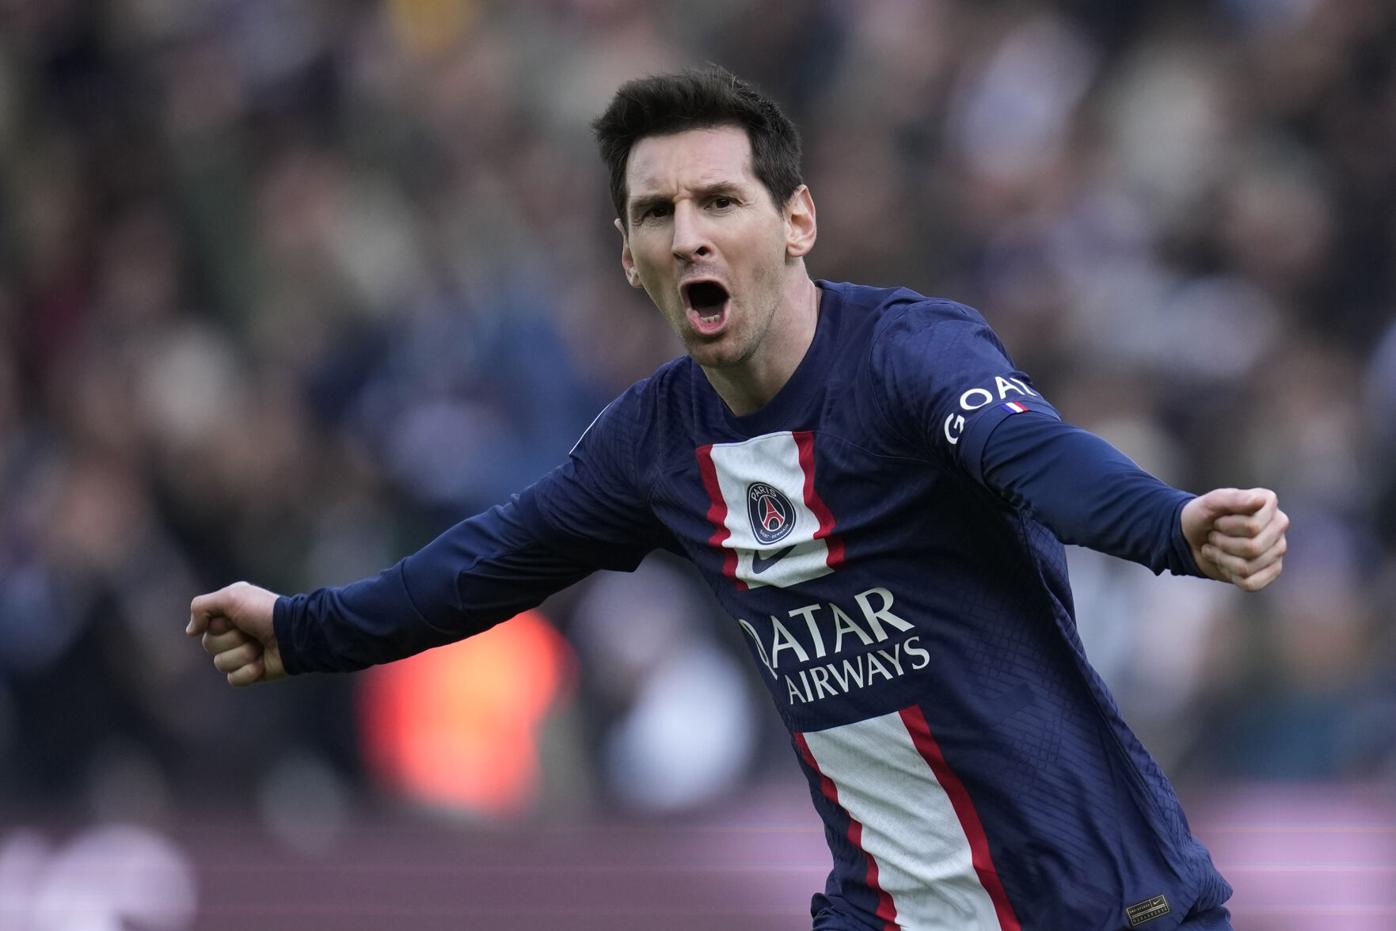 I wouldn't be at all surprised- Former PSG star believes Lionel